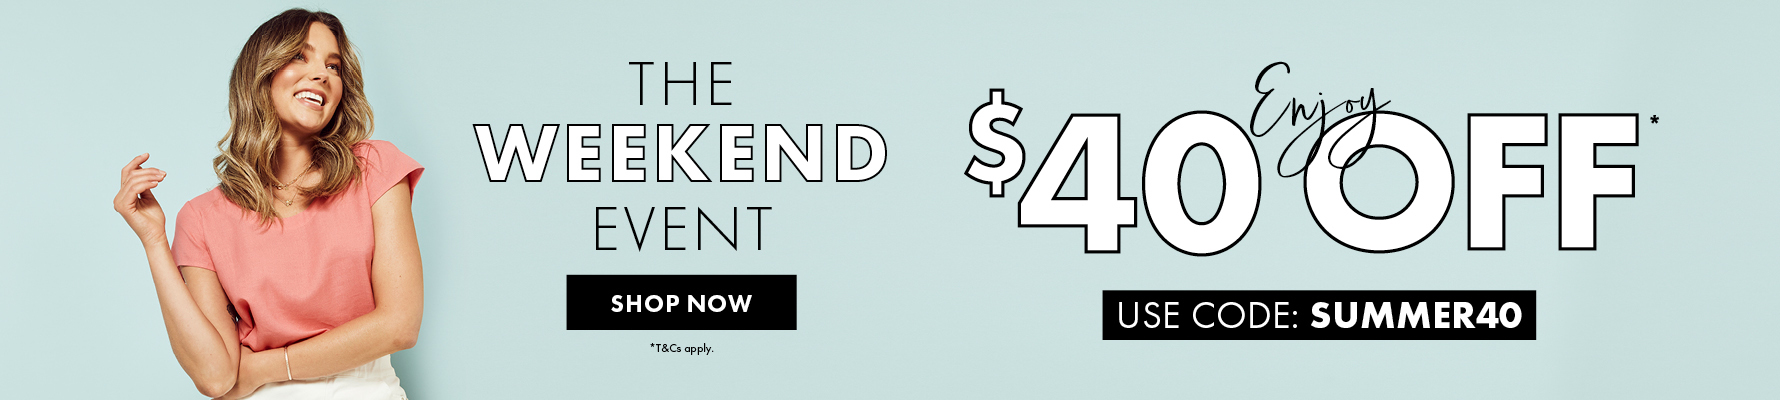 Rockmans Weekend Event Extra $40 OFF $100 with coupon code